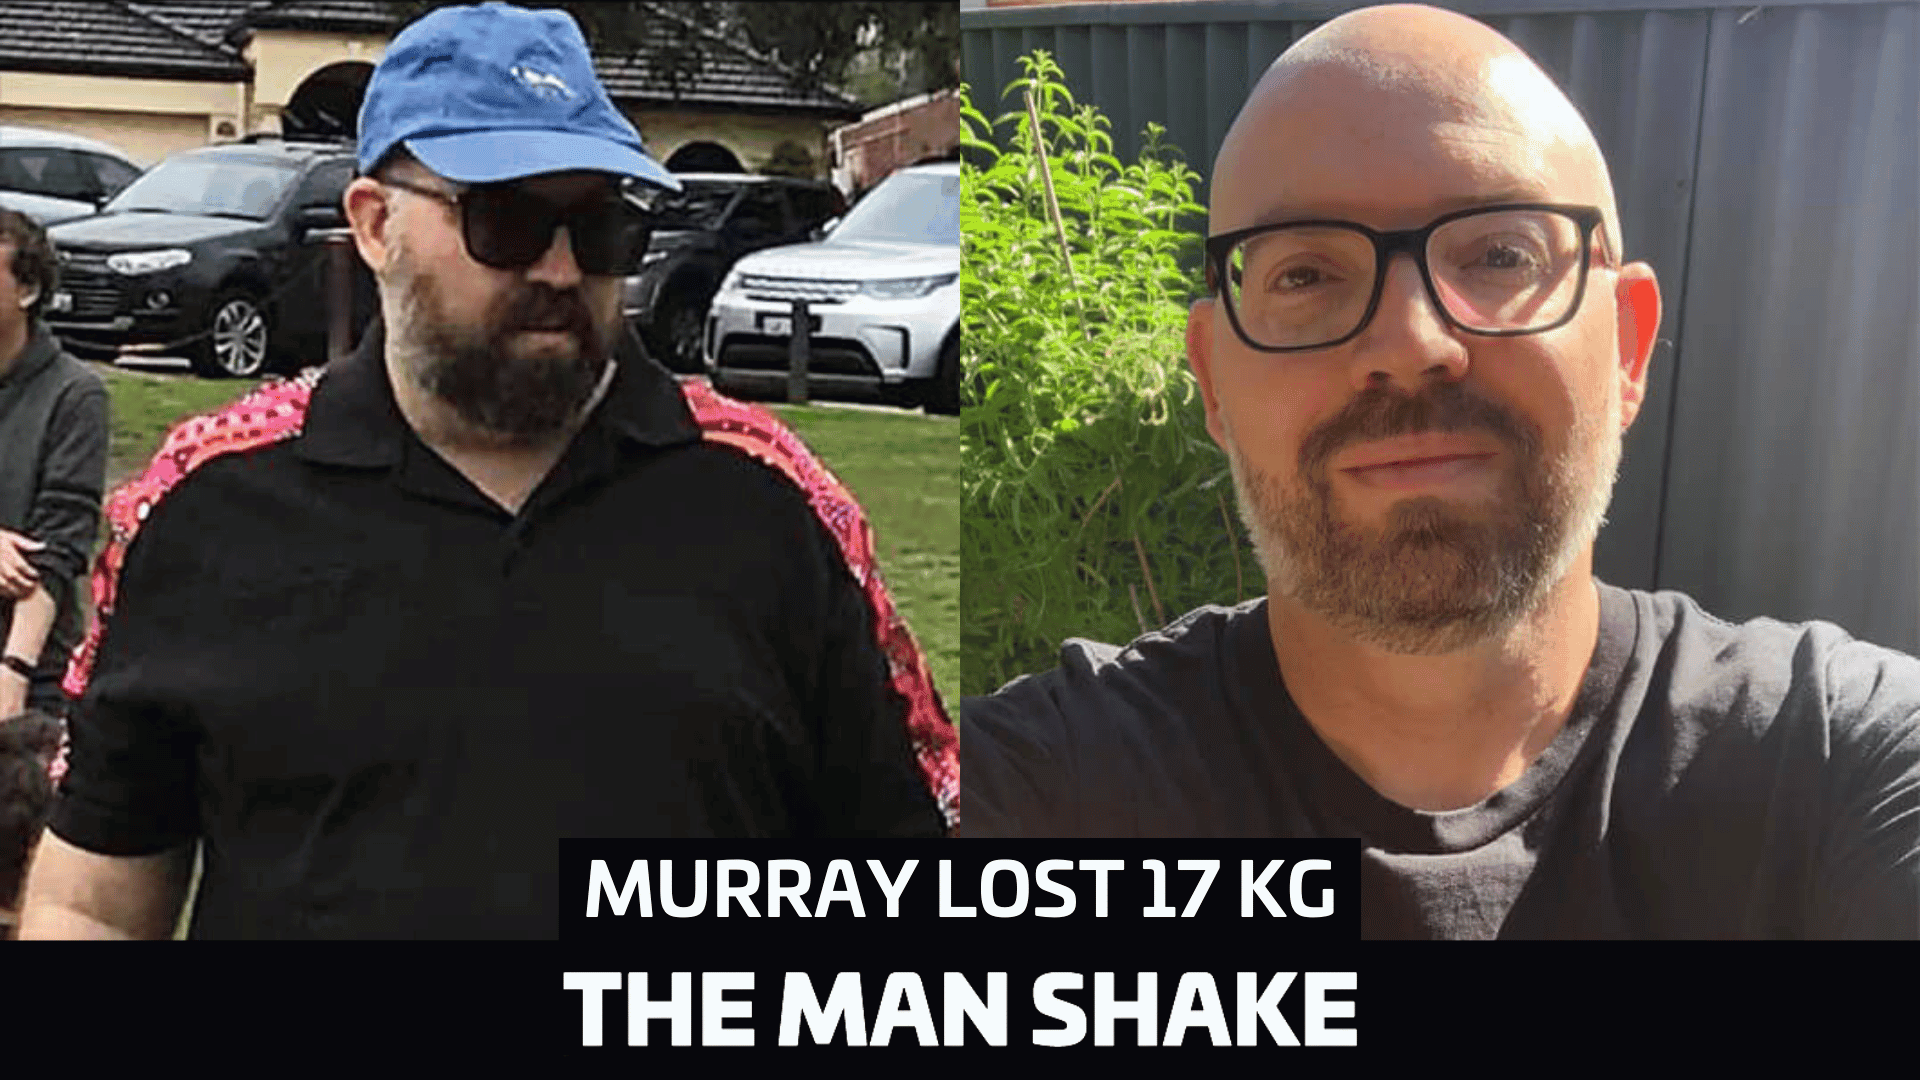 Murray lost 17kg in 3 months!